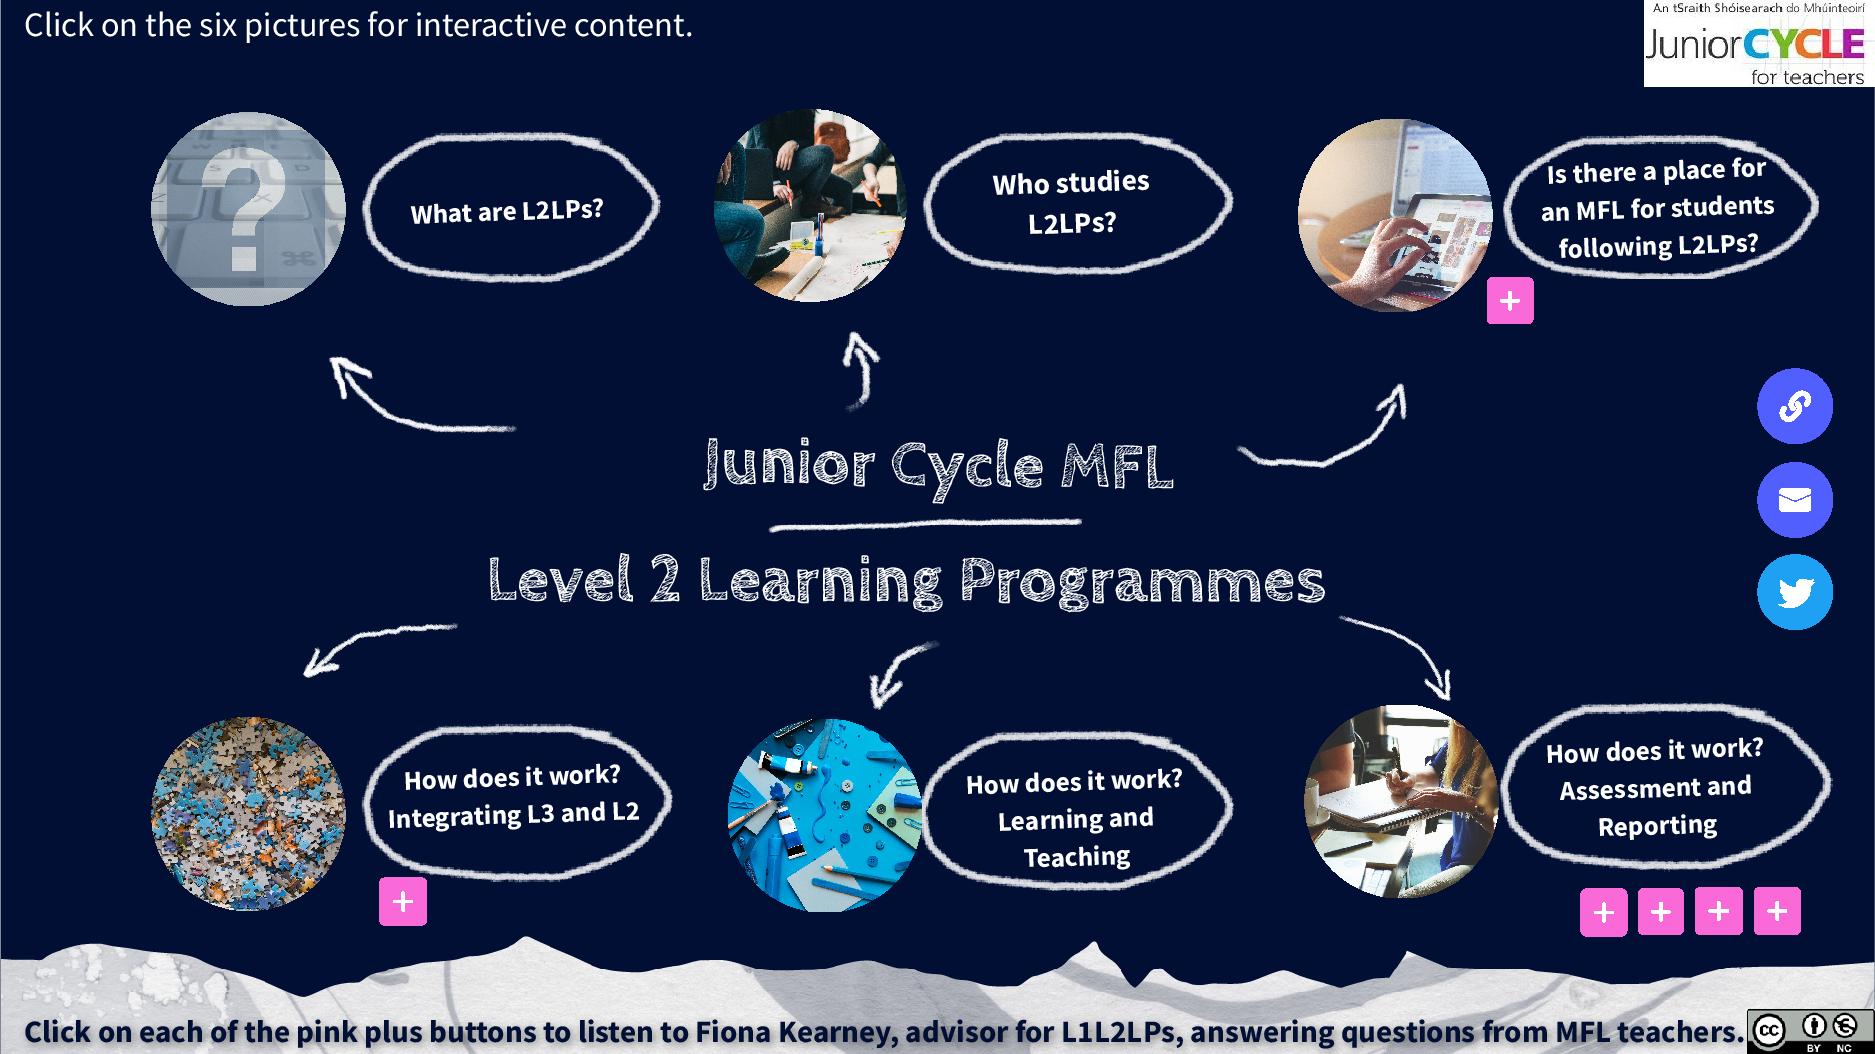 Further Developing our Understanding of Learning 2 Learning Programmes (L2LPs) in MFL